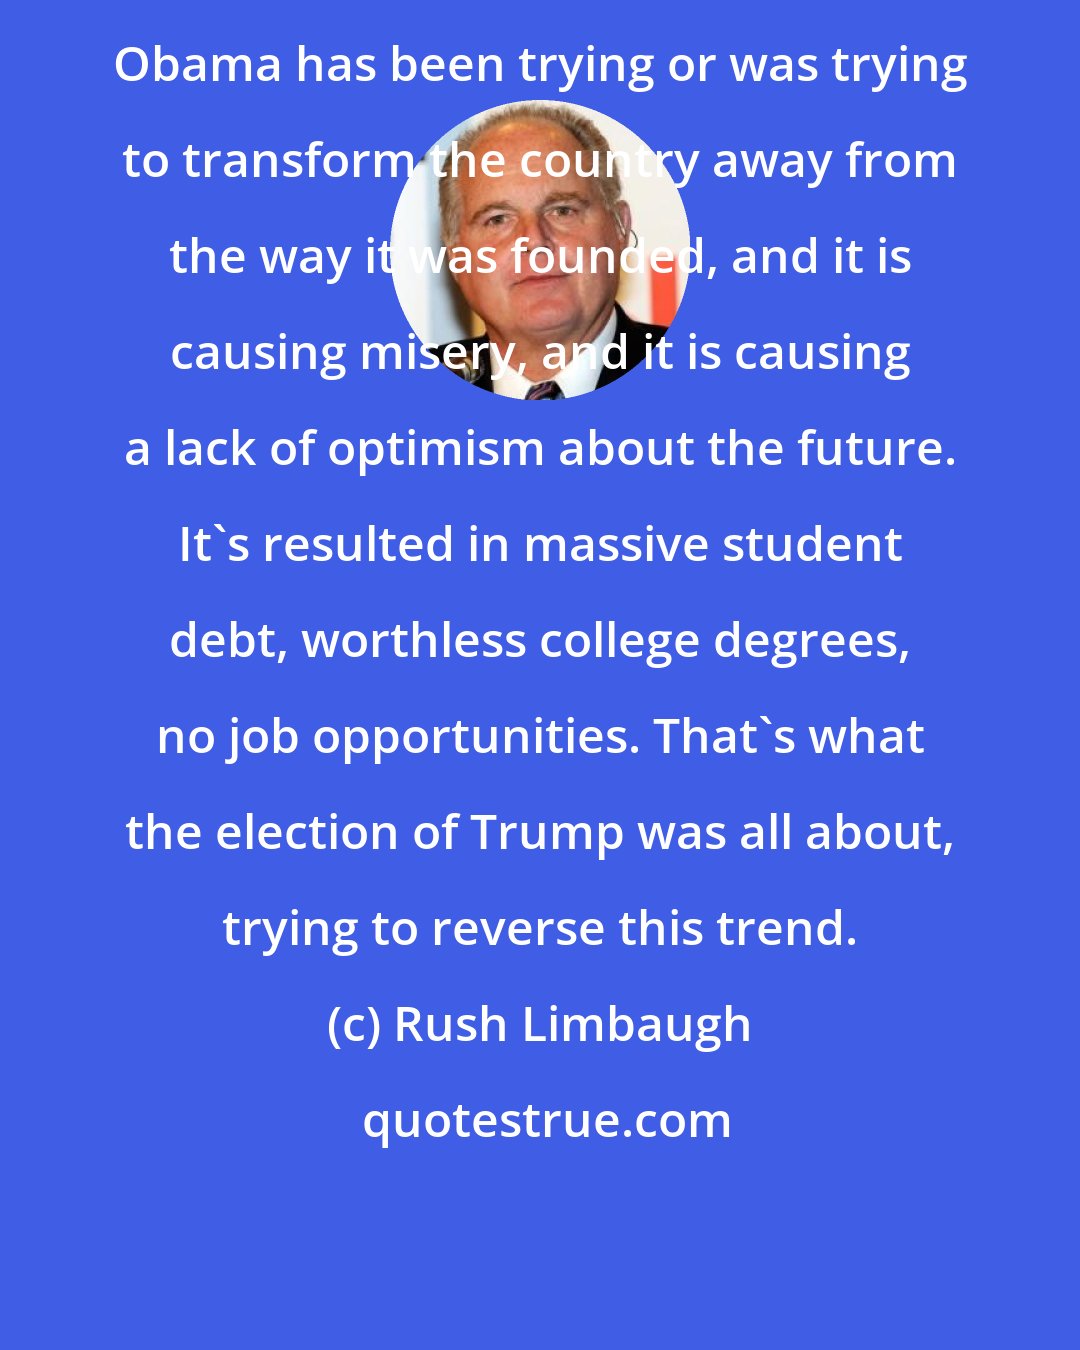 Rush Limbaugh: Obama has been trying or was trying to transform the country away from the way it was founded, and it is causing misery, and it is causing a lack of optimism about the future. It's resulted in massive student debt, worthless college degrees, no job opportunities. That's what the election of Trump was all about, trying to reverse this trend.